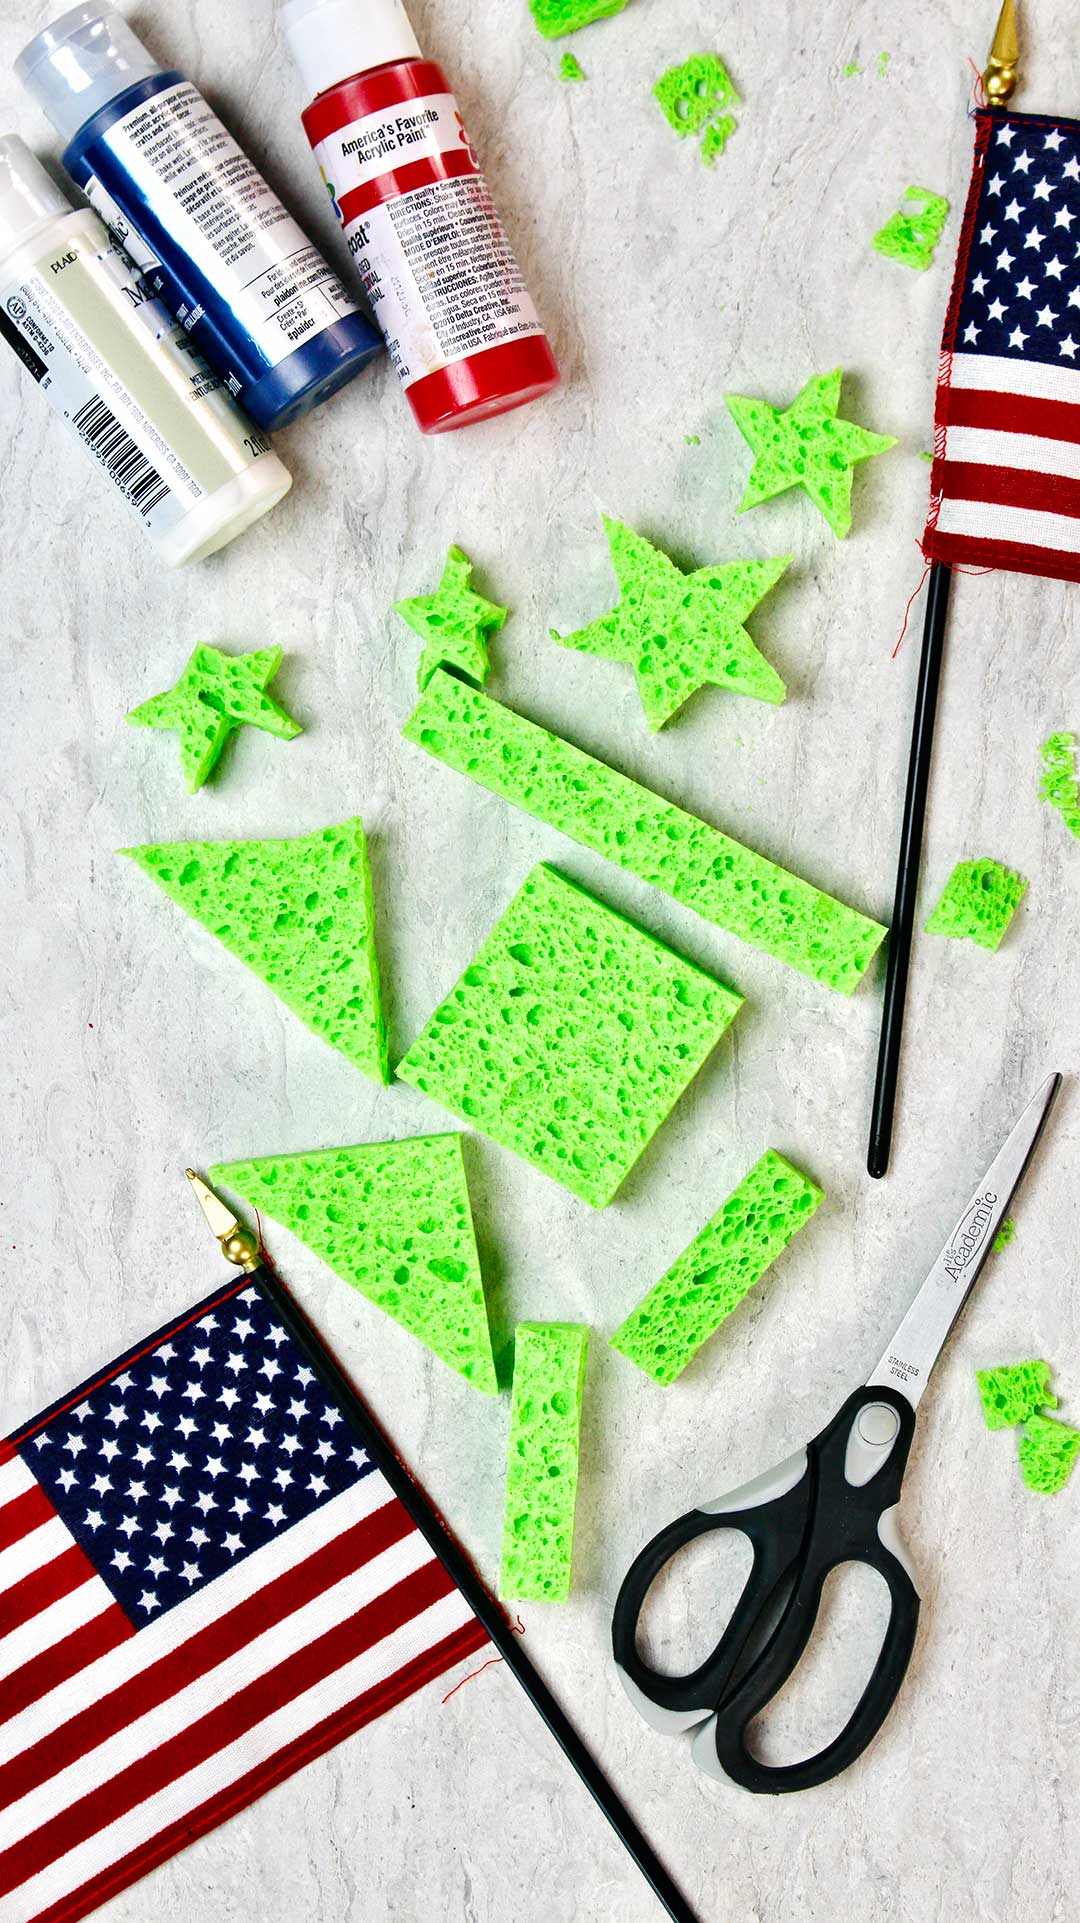 Flat lay of green cut sponges, American flags, acrylic paint and a black pair of scissors.